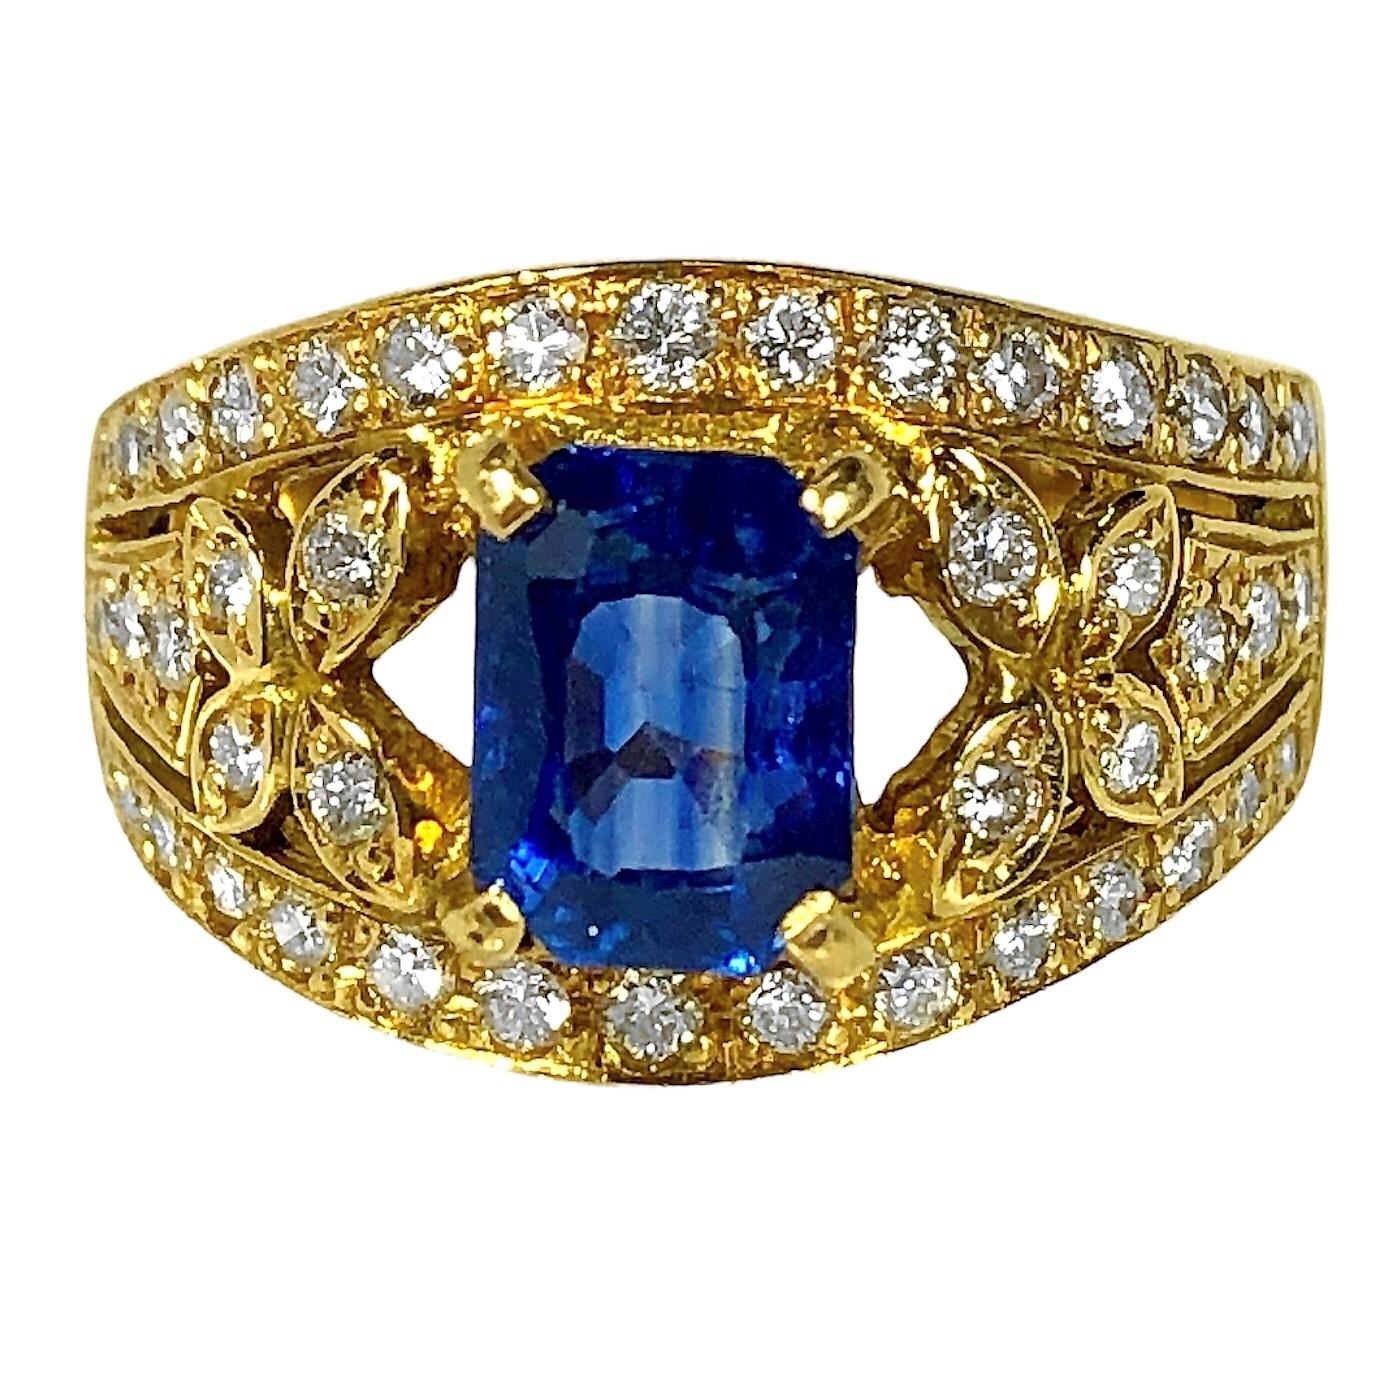 This lovely and dainty Late-20th Century cocktail ring has, at it's center, one rich blue modified emerald cut sapphire weighing exactly 1.39ct, flanked and surrounded by 44 brilliant cut diamonds having a total exact weight of .50ct.  All diamonds